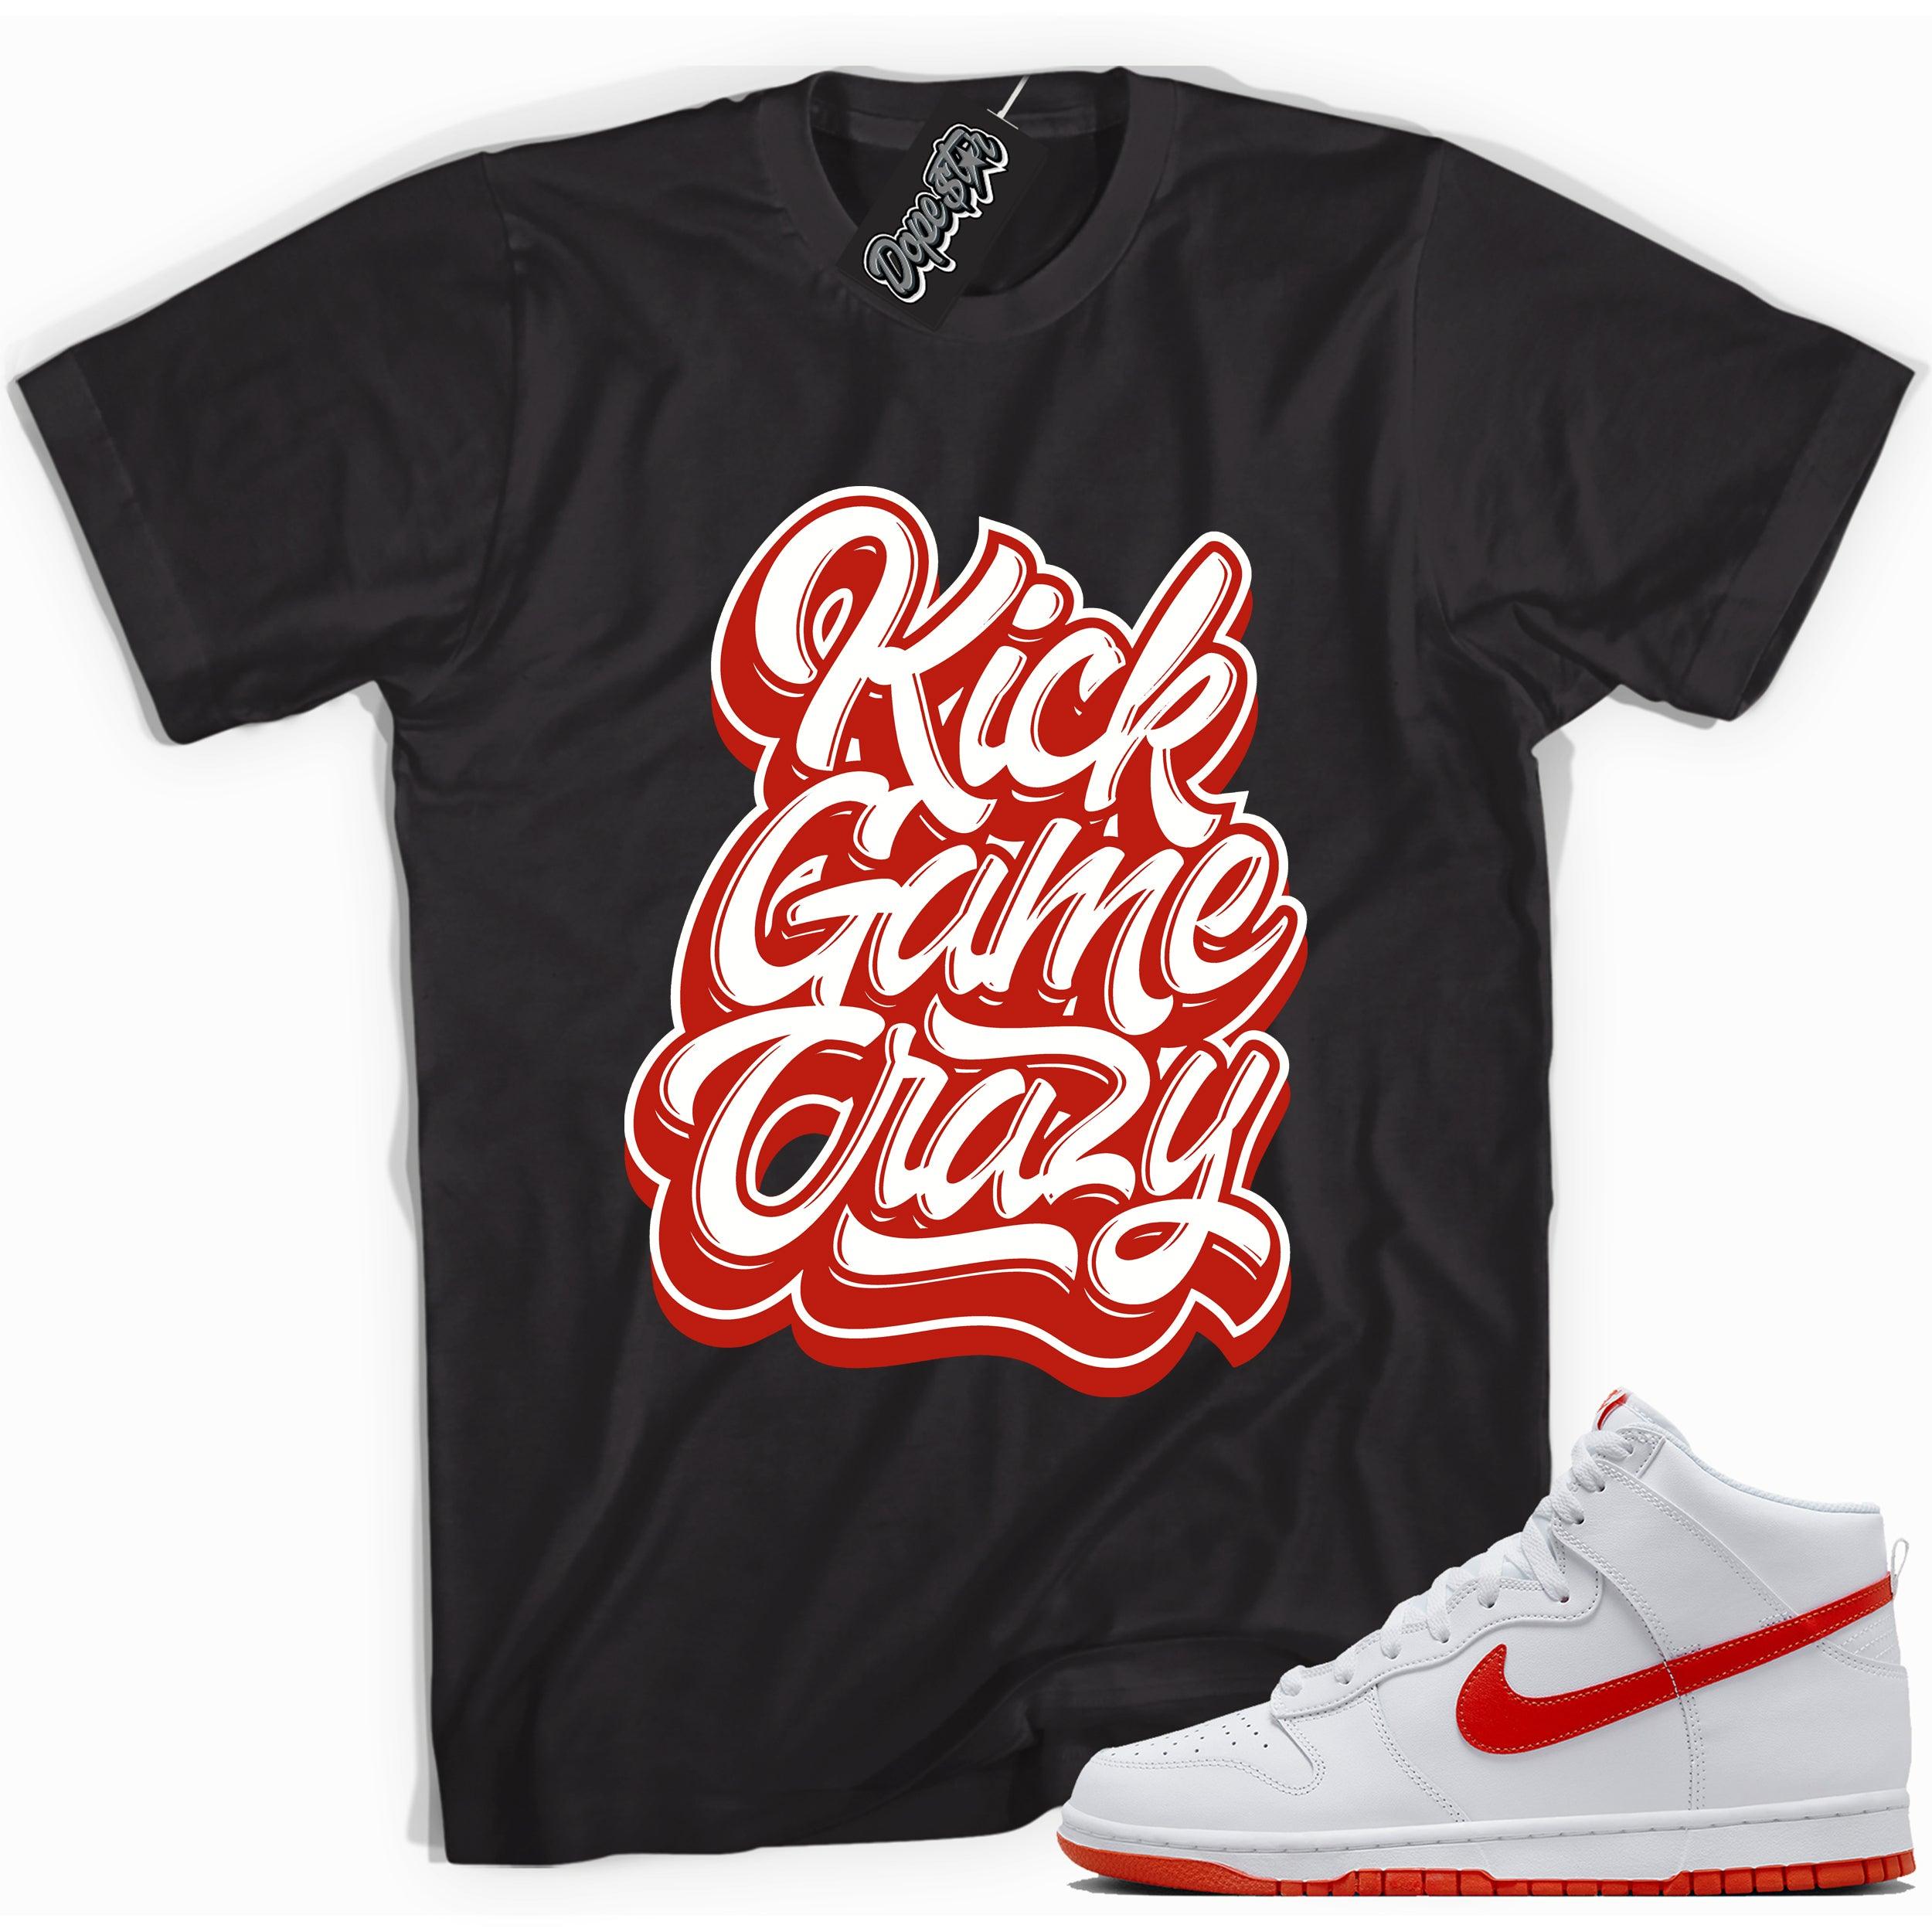 Cool black graphic tee with 'kick game crazy' print, that perfectly matches Nike Dunk High White Picante Red sneakers.